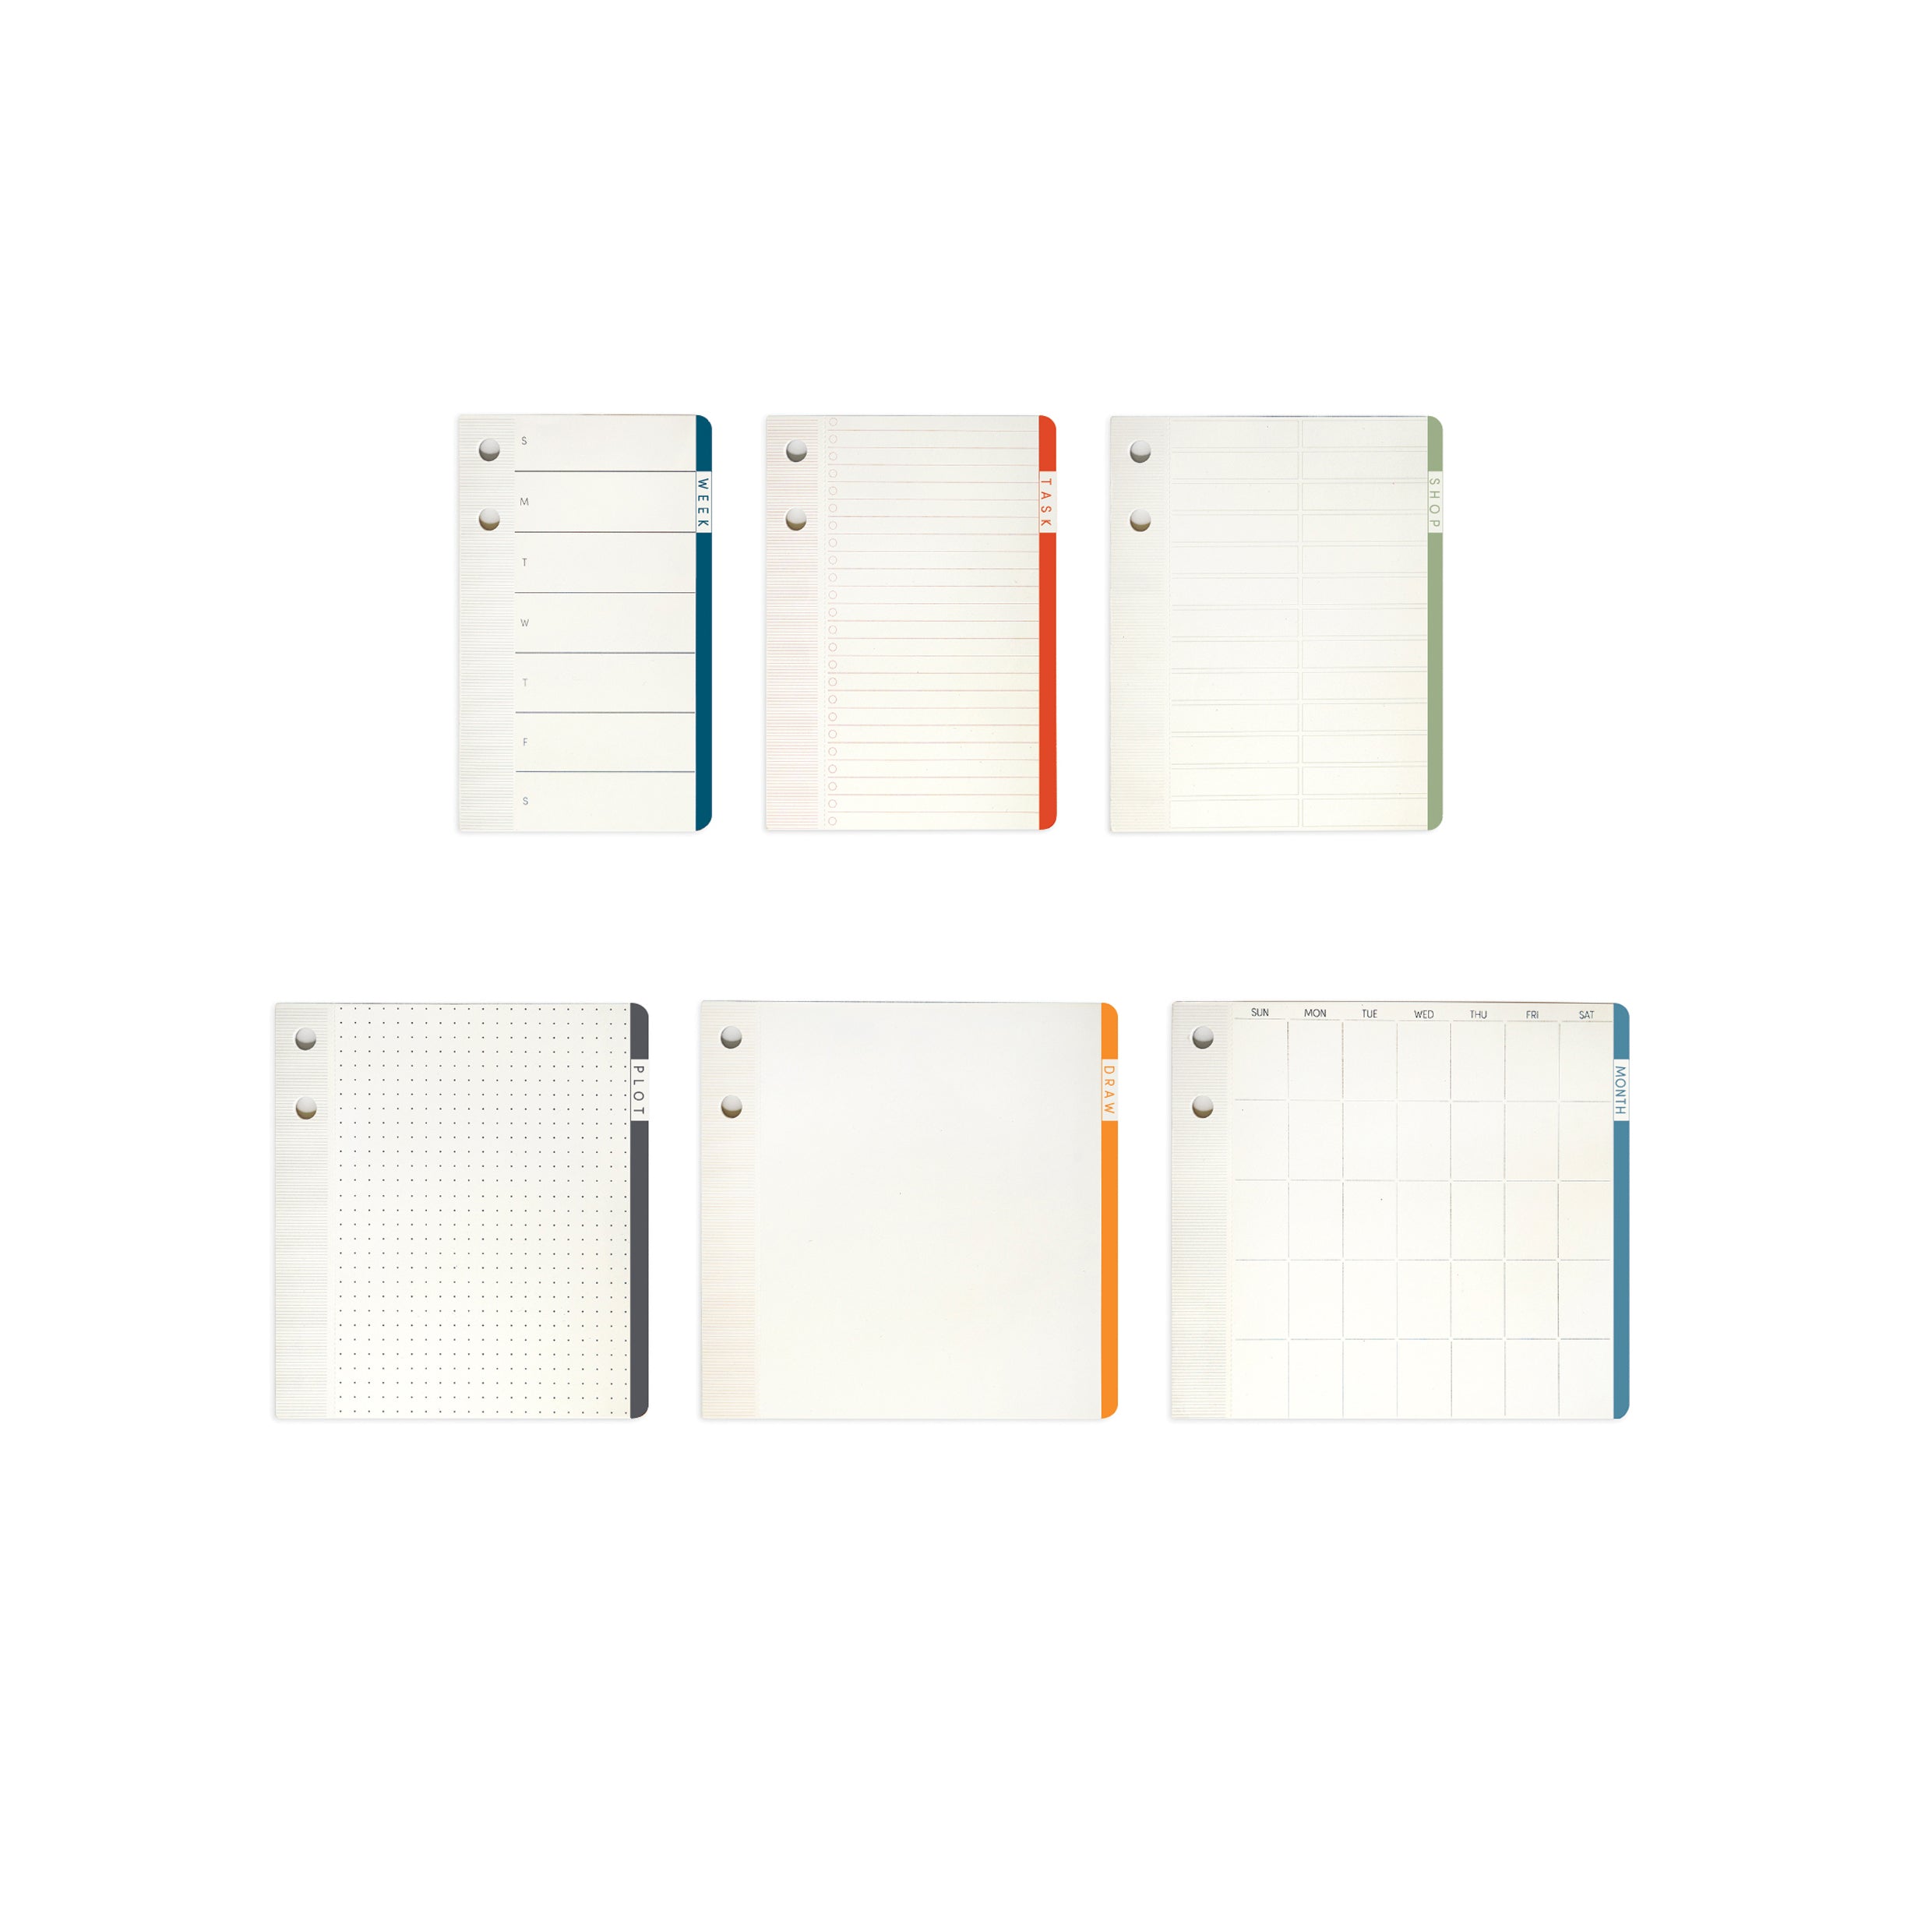 jOTBLOCK stacked pads portable planner set